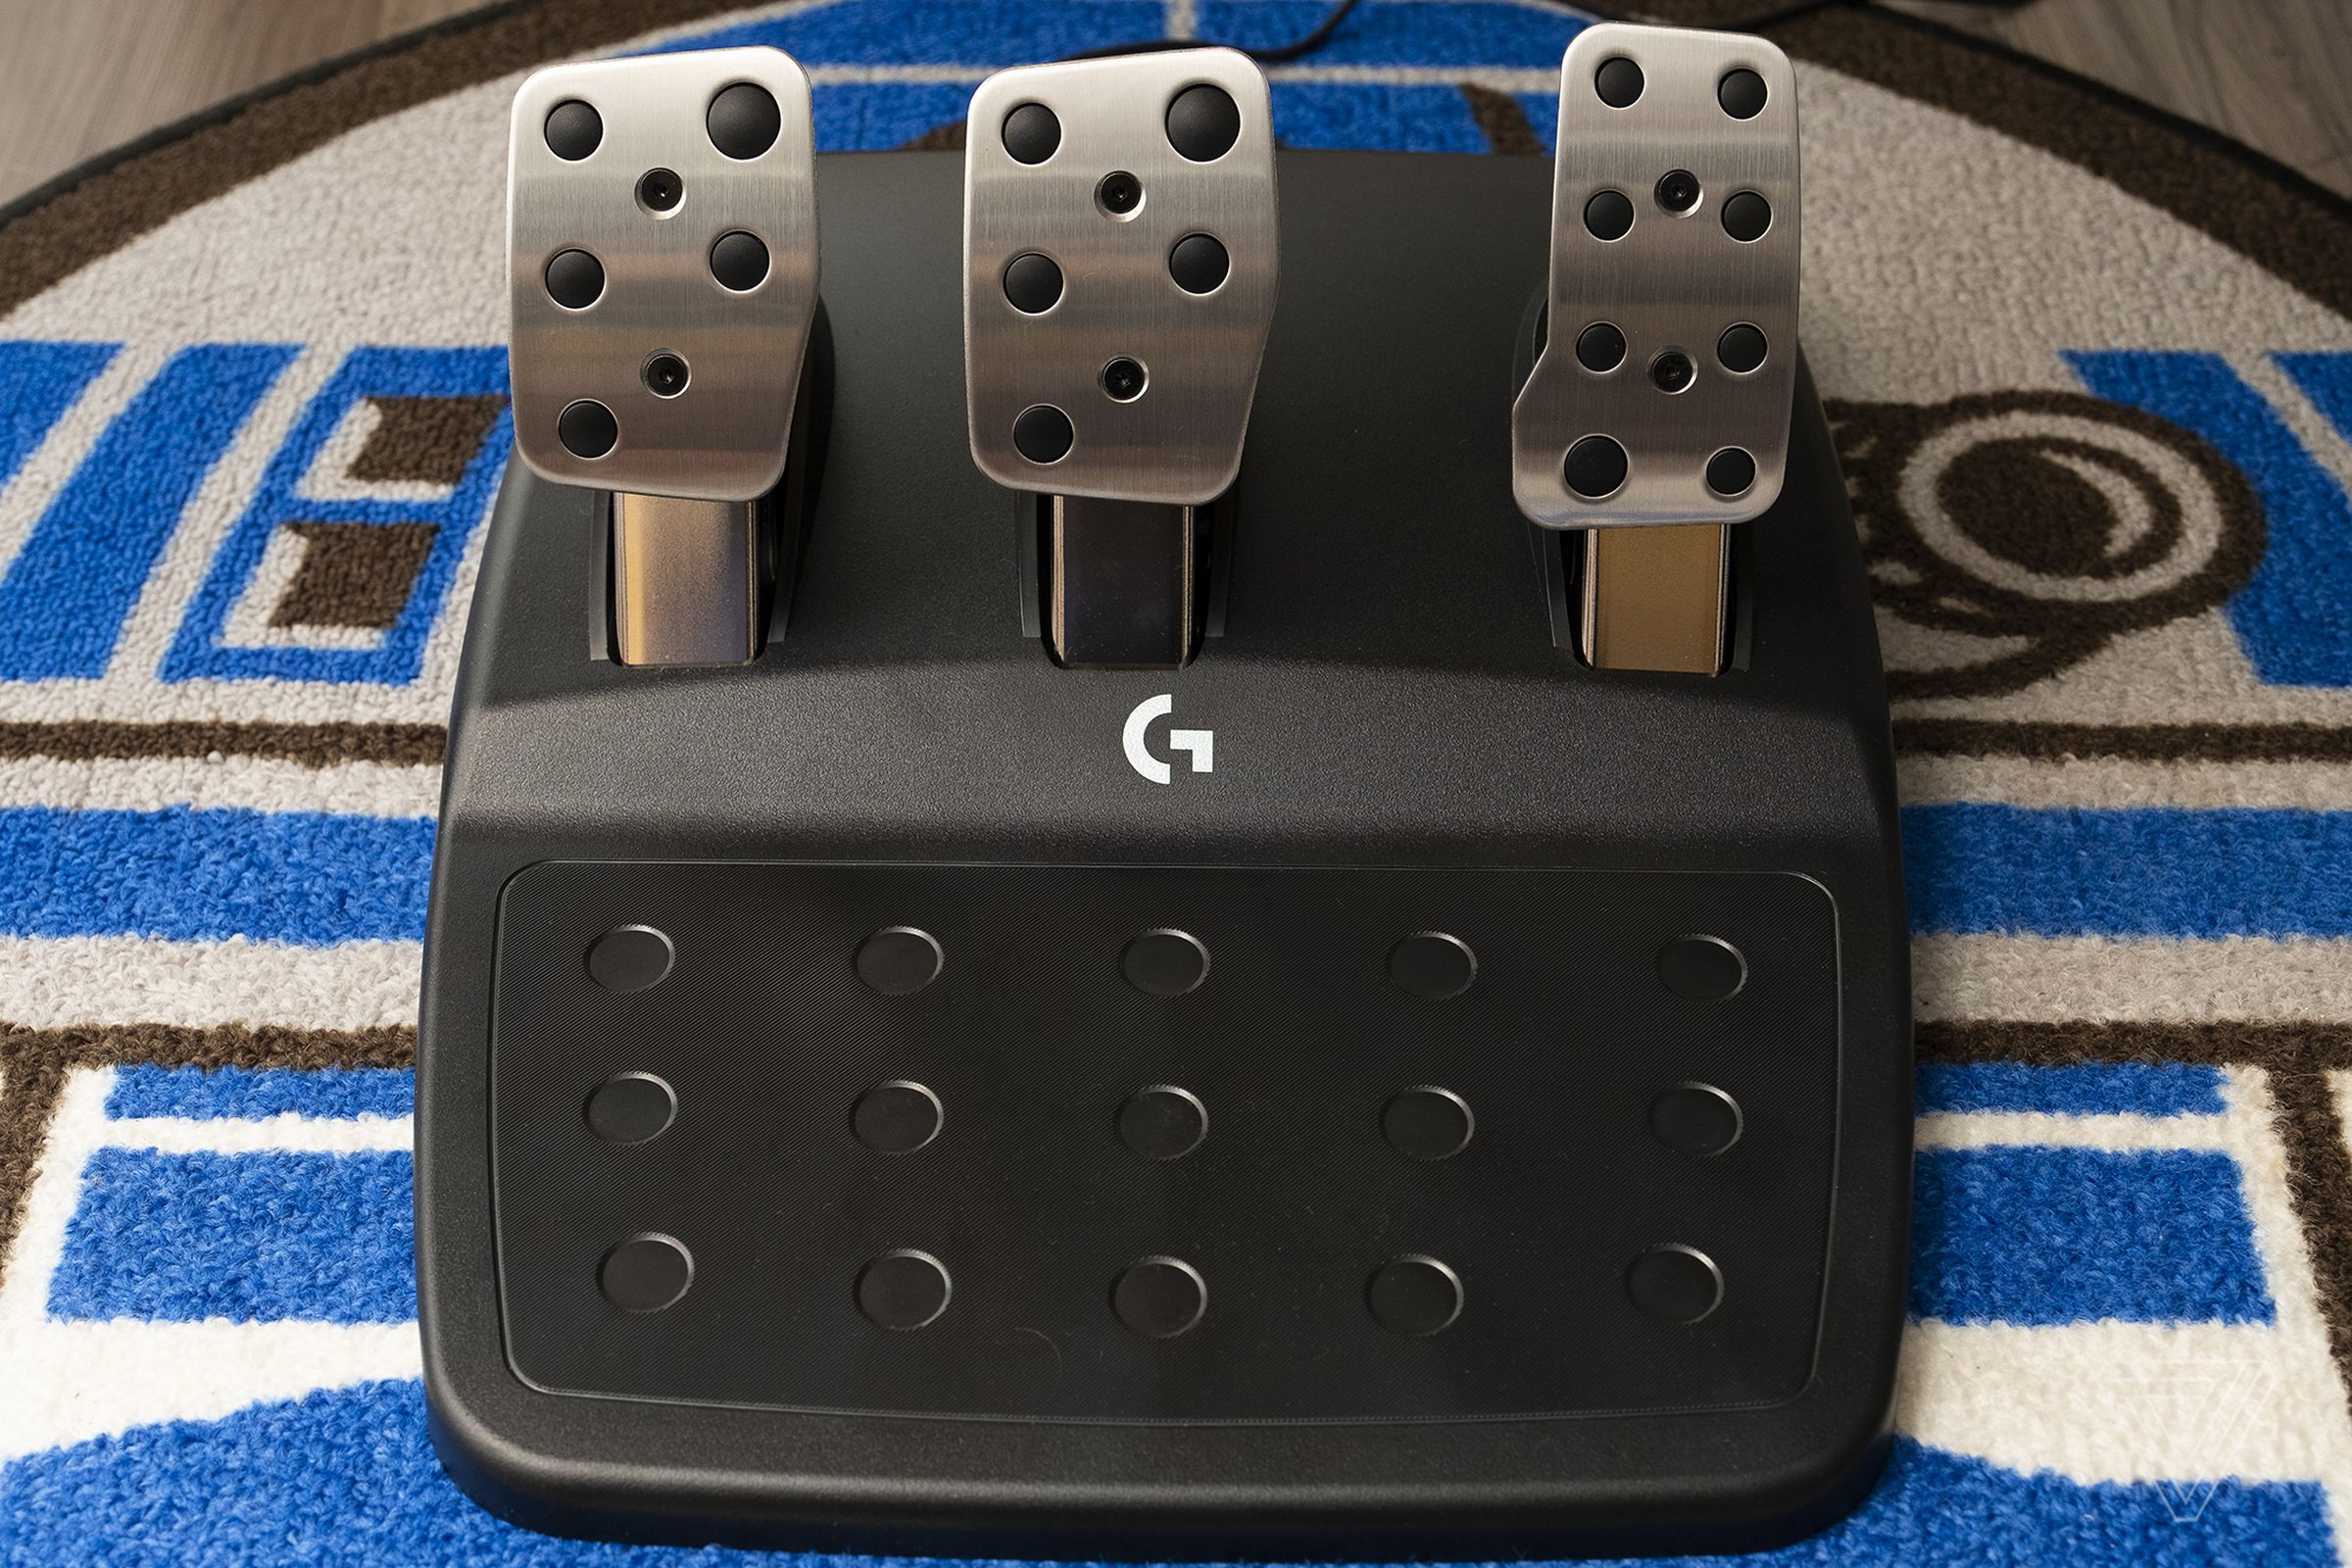 The pedal set that is included with the G923 is visually the same as prior models, but the brake pedal now utilizes a progressive spring.